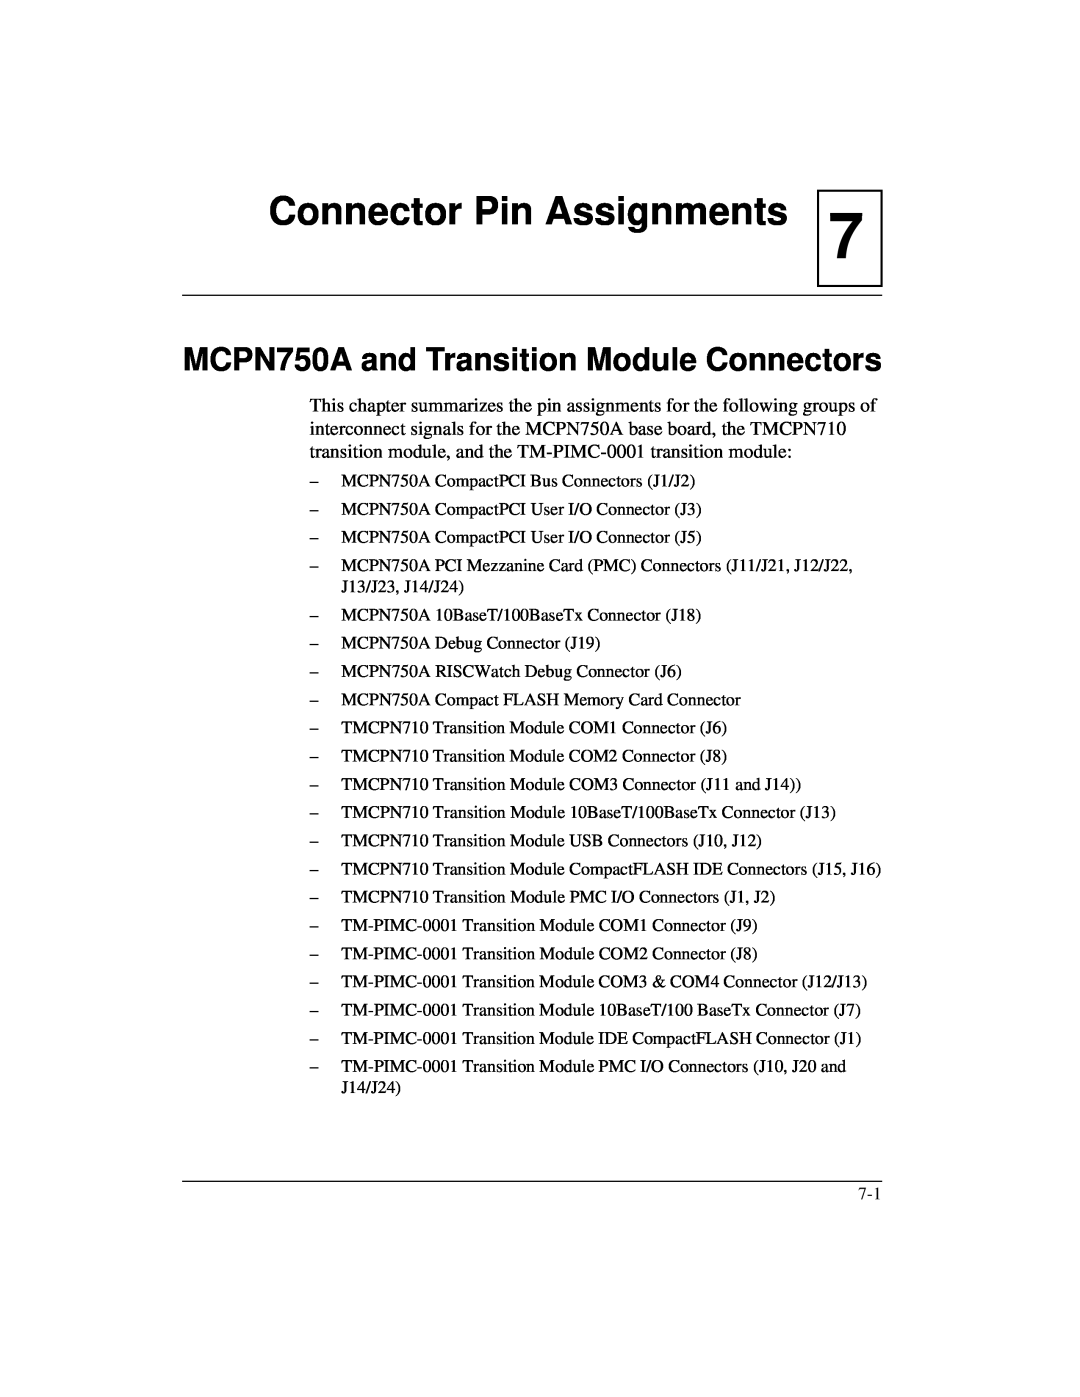 Motorola IH5 manual Connector Pin Assignments, MCPN750A and Transition Module Connectors 